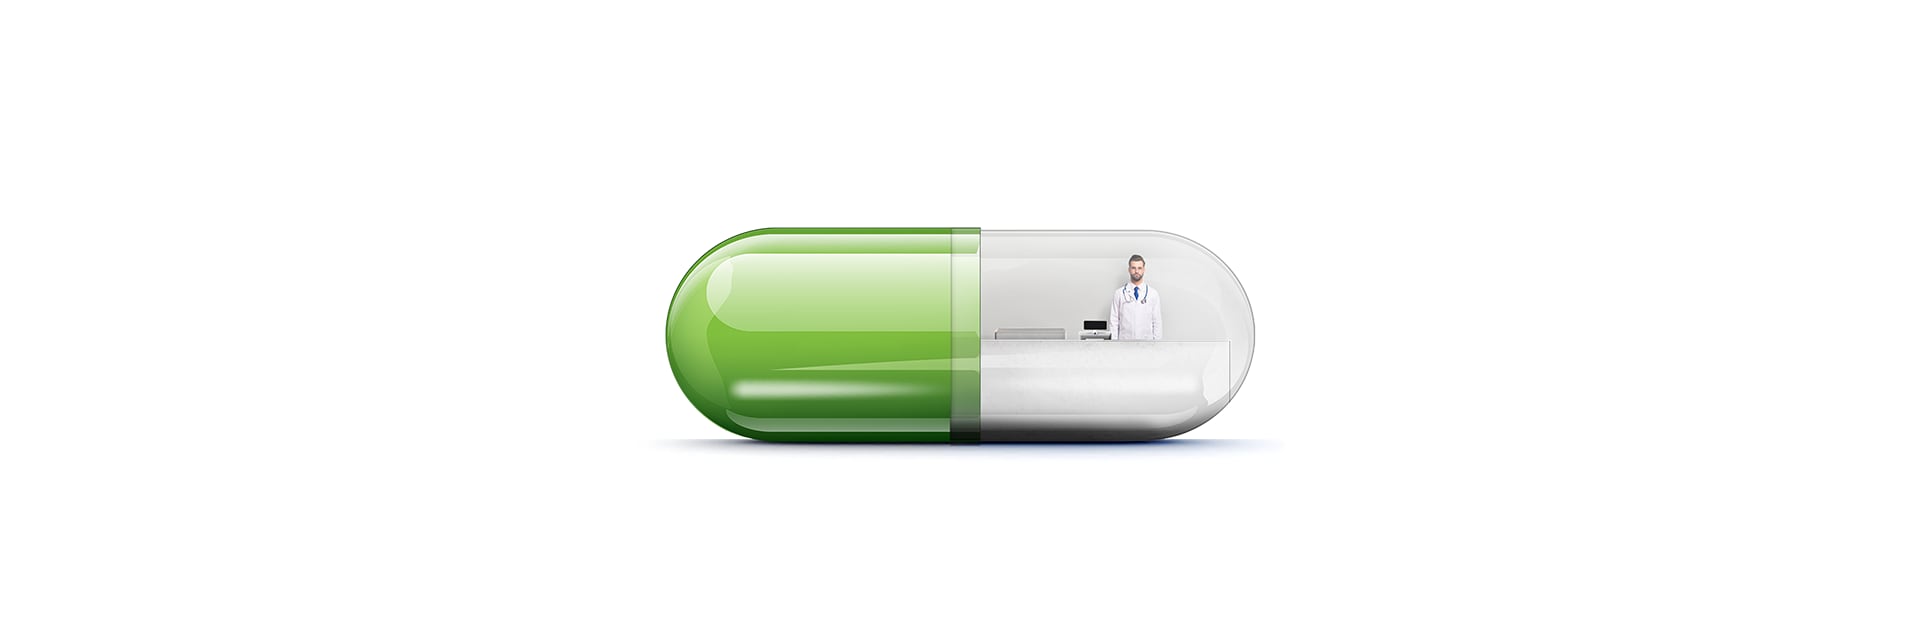 Future of pharmacists | Deloitte Insights